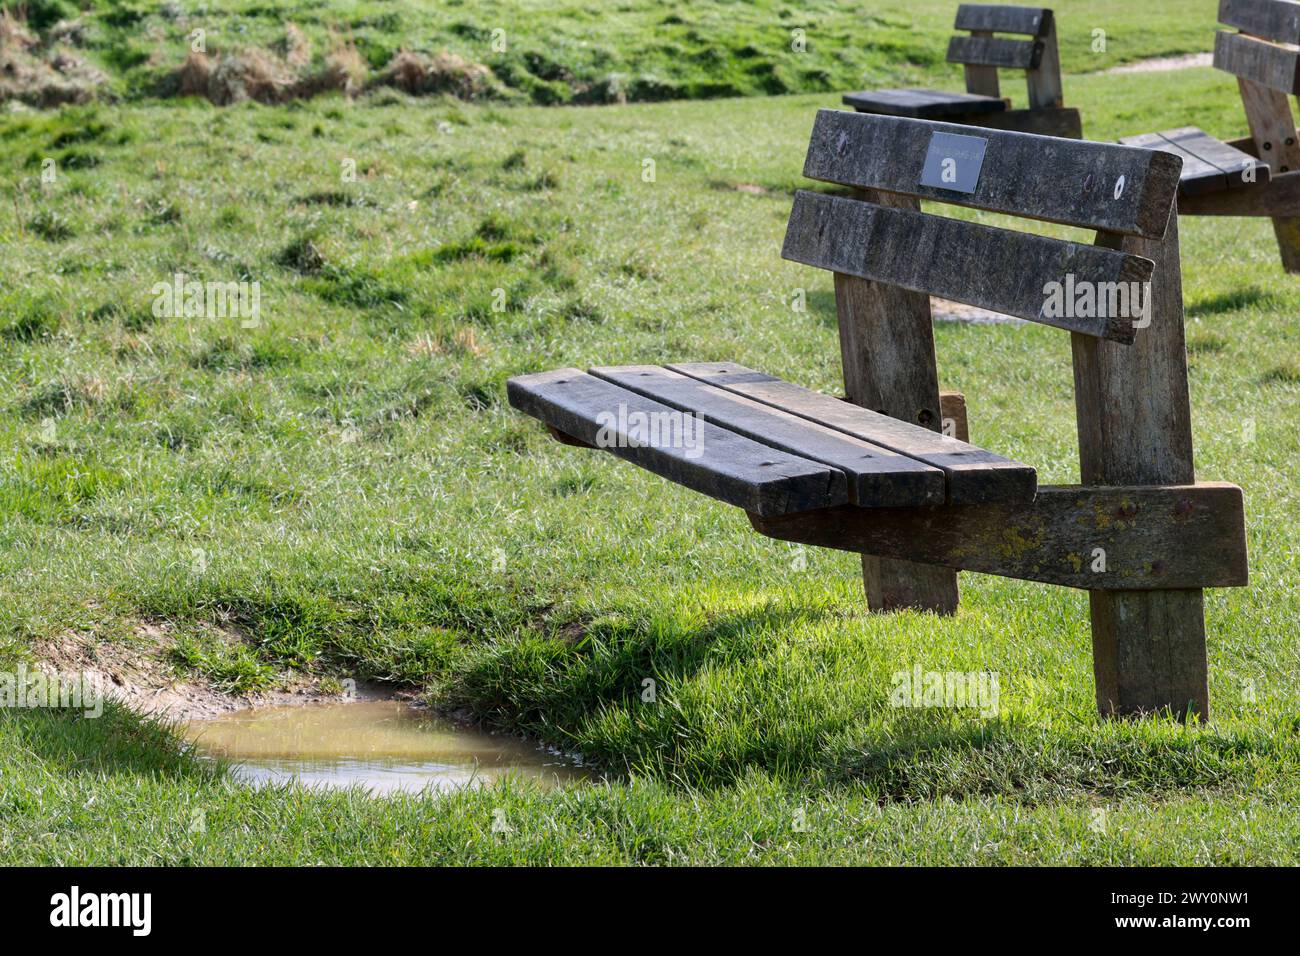 Public wooden bench outdoors with deep water filled trench grass and mud worn away by boots over years of use on busy cliff top area local attraction Stock Photo